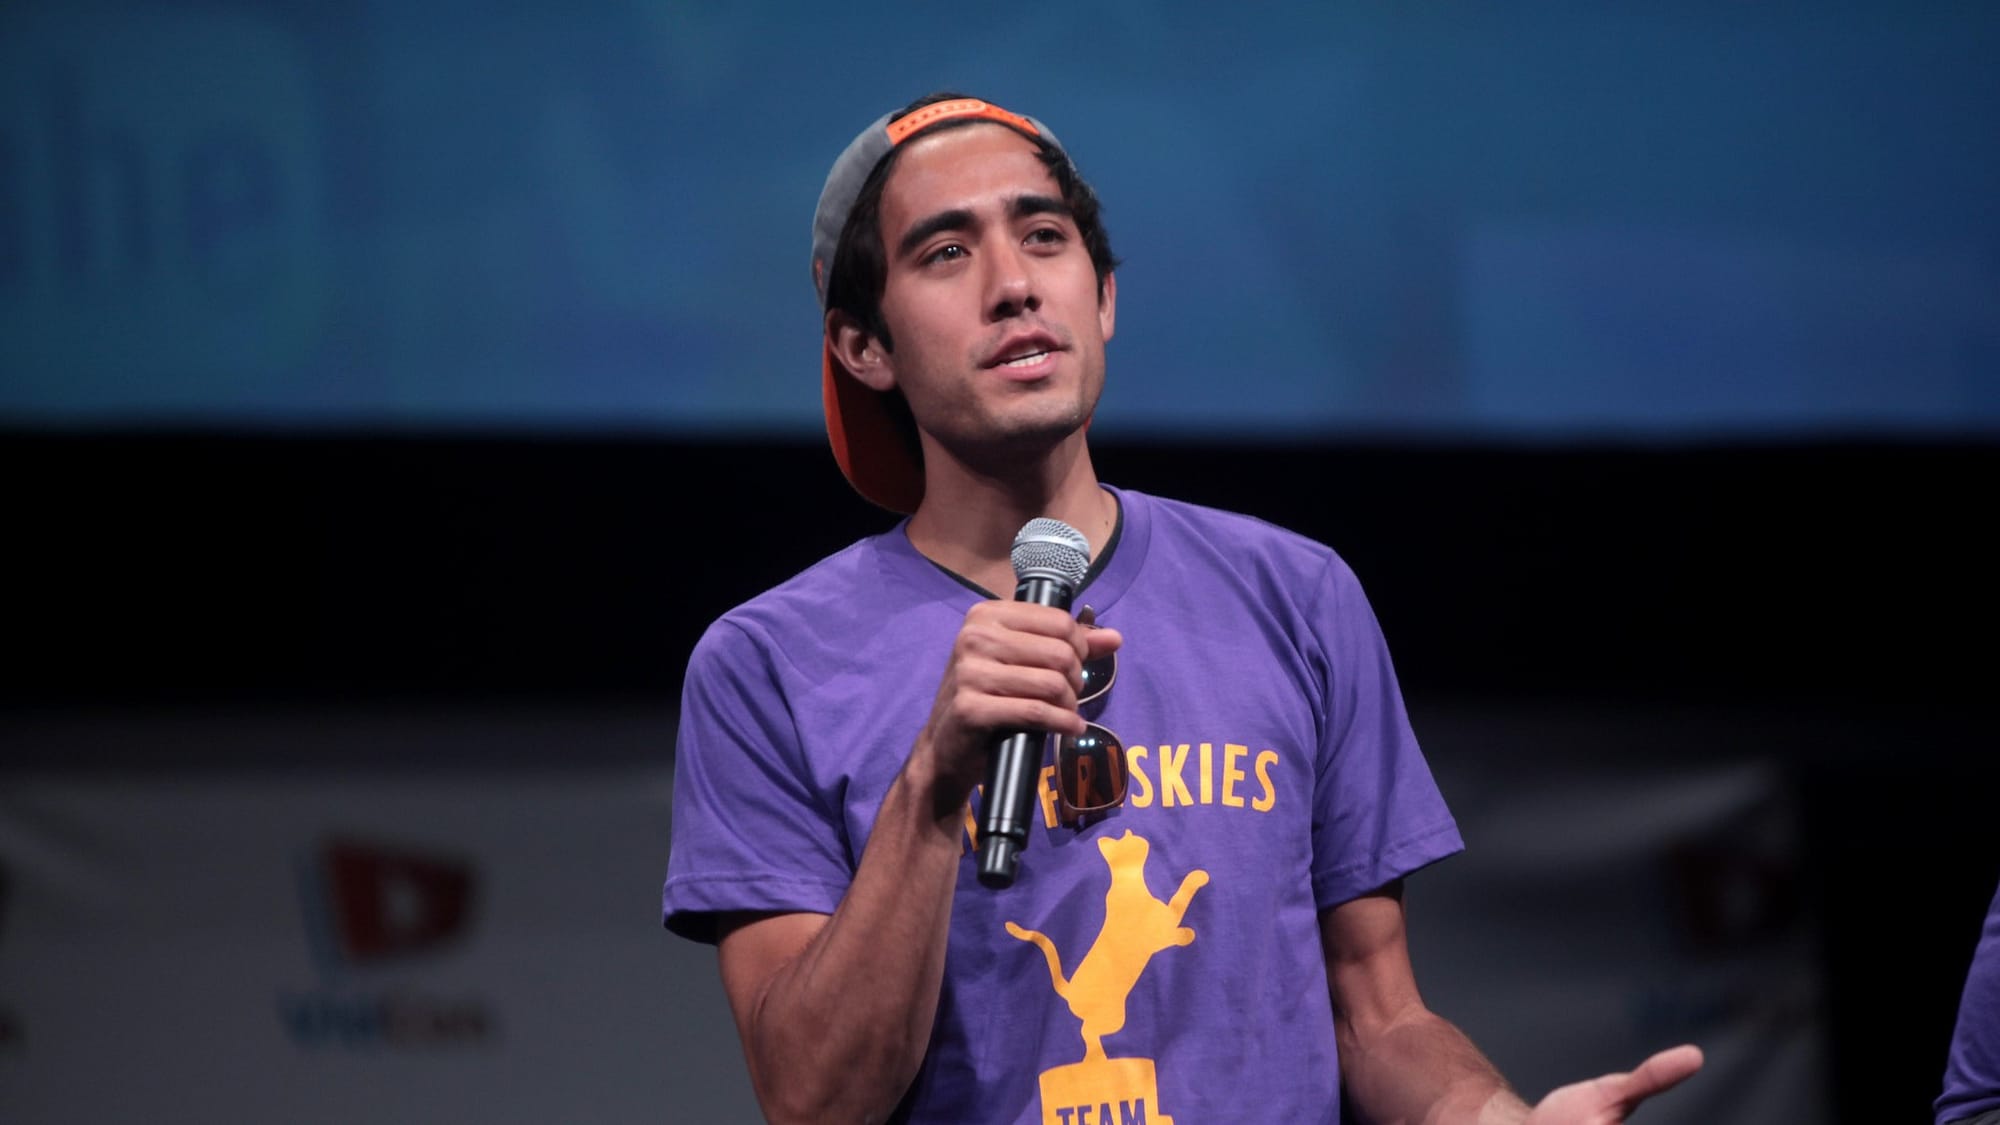 Image: Zach King wearing a purple shirt and backwards baseball cap, speaking on stage at VidCon 2014 in Anaheim, CA.